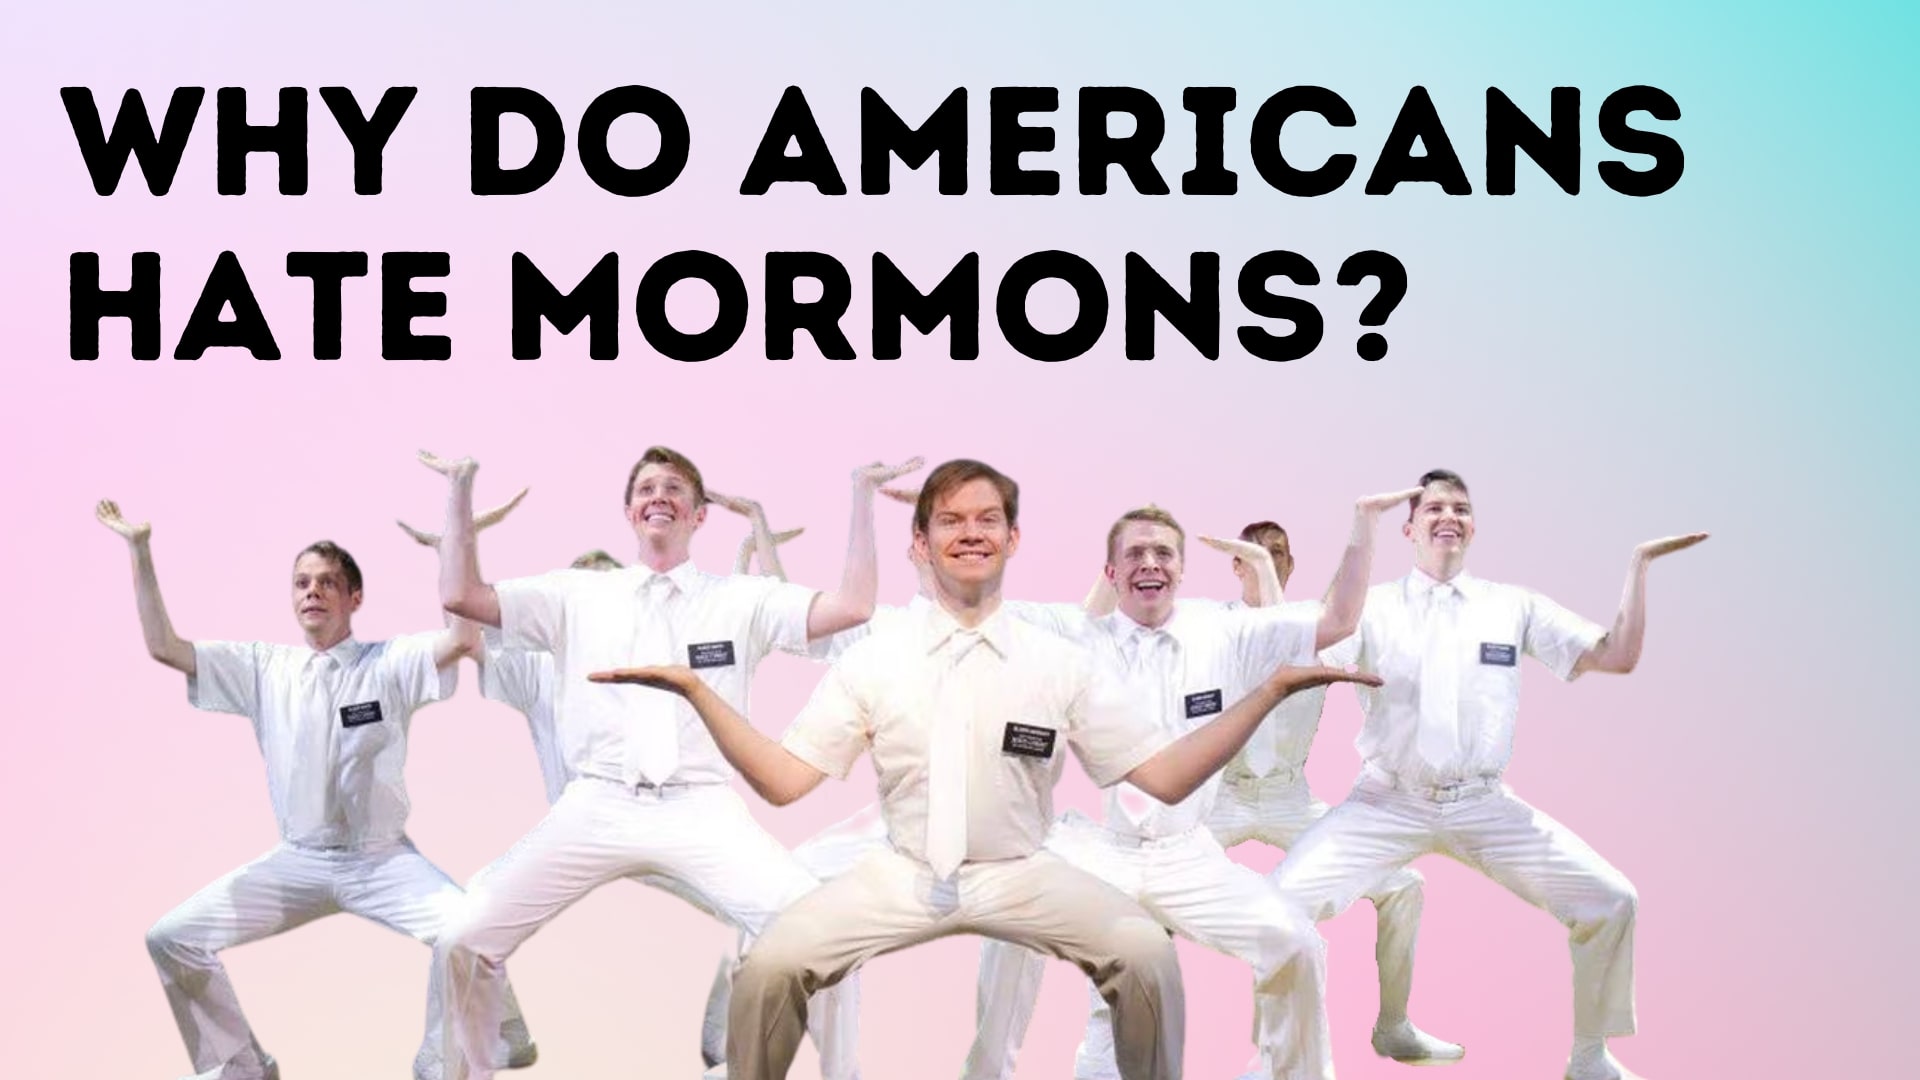 Why do Americans hate Mormons?